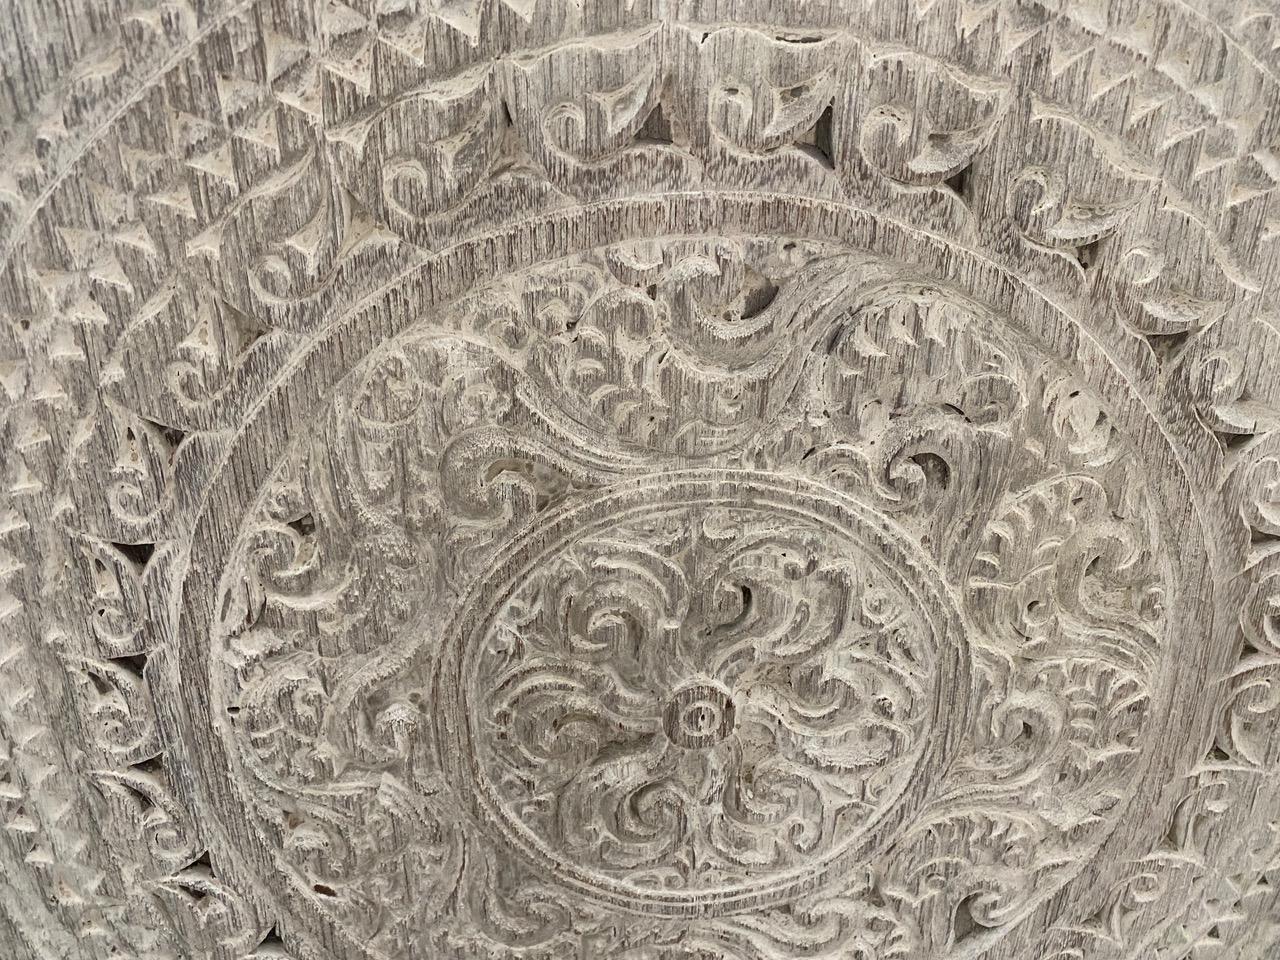 Antique hand carved merbau wood panel from Lampung, Sumatra. We have a collection in various sizes all white washed. The size and price reflect the one shown. Stunning on both sides.

This panel was sourced in the spirit of wabi sabi, a Japanese